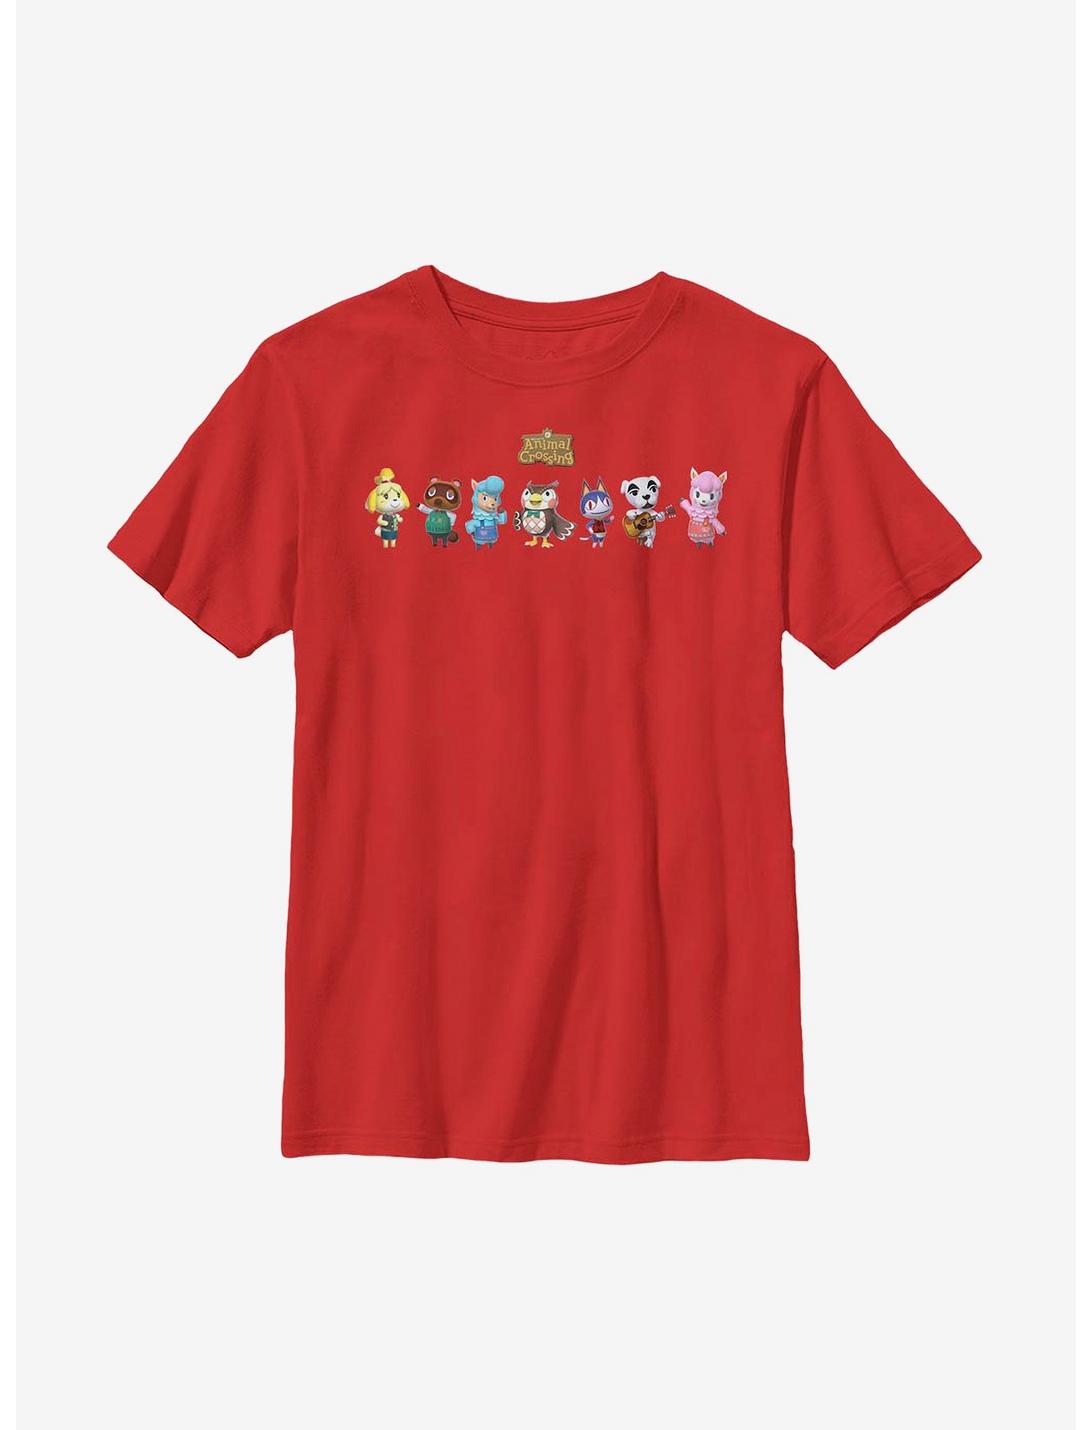 Animal Crossing Greetings Youth T-Shirt, RED, hi-res